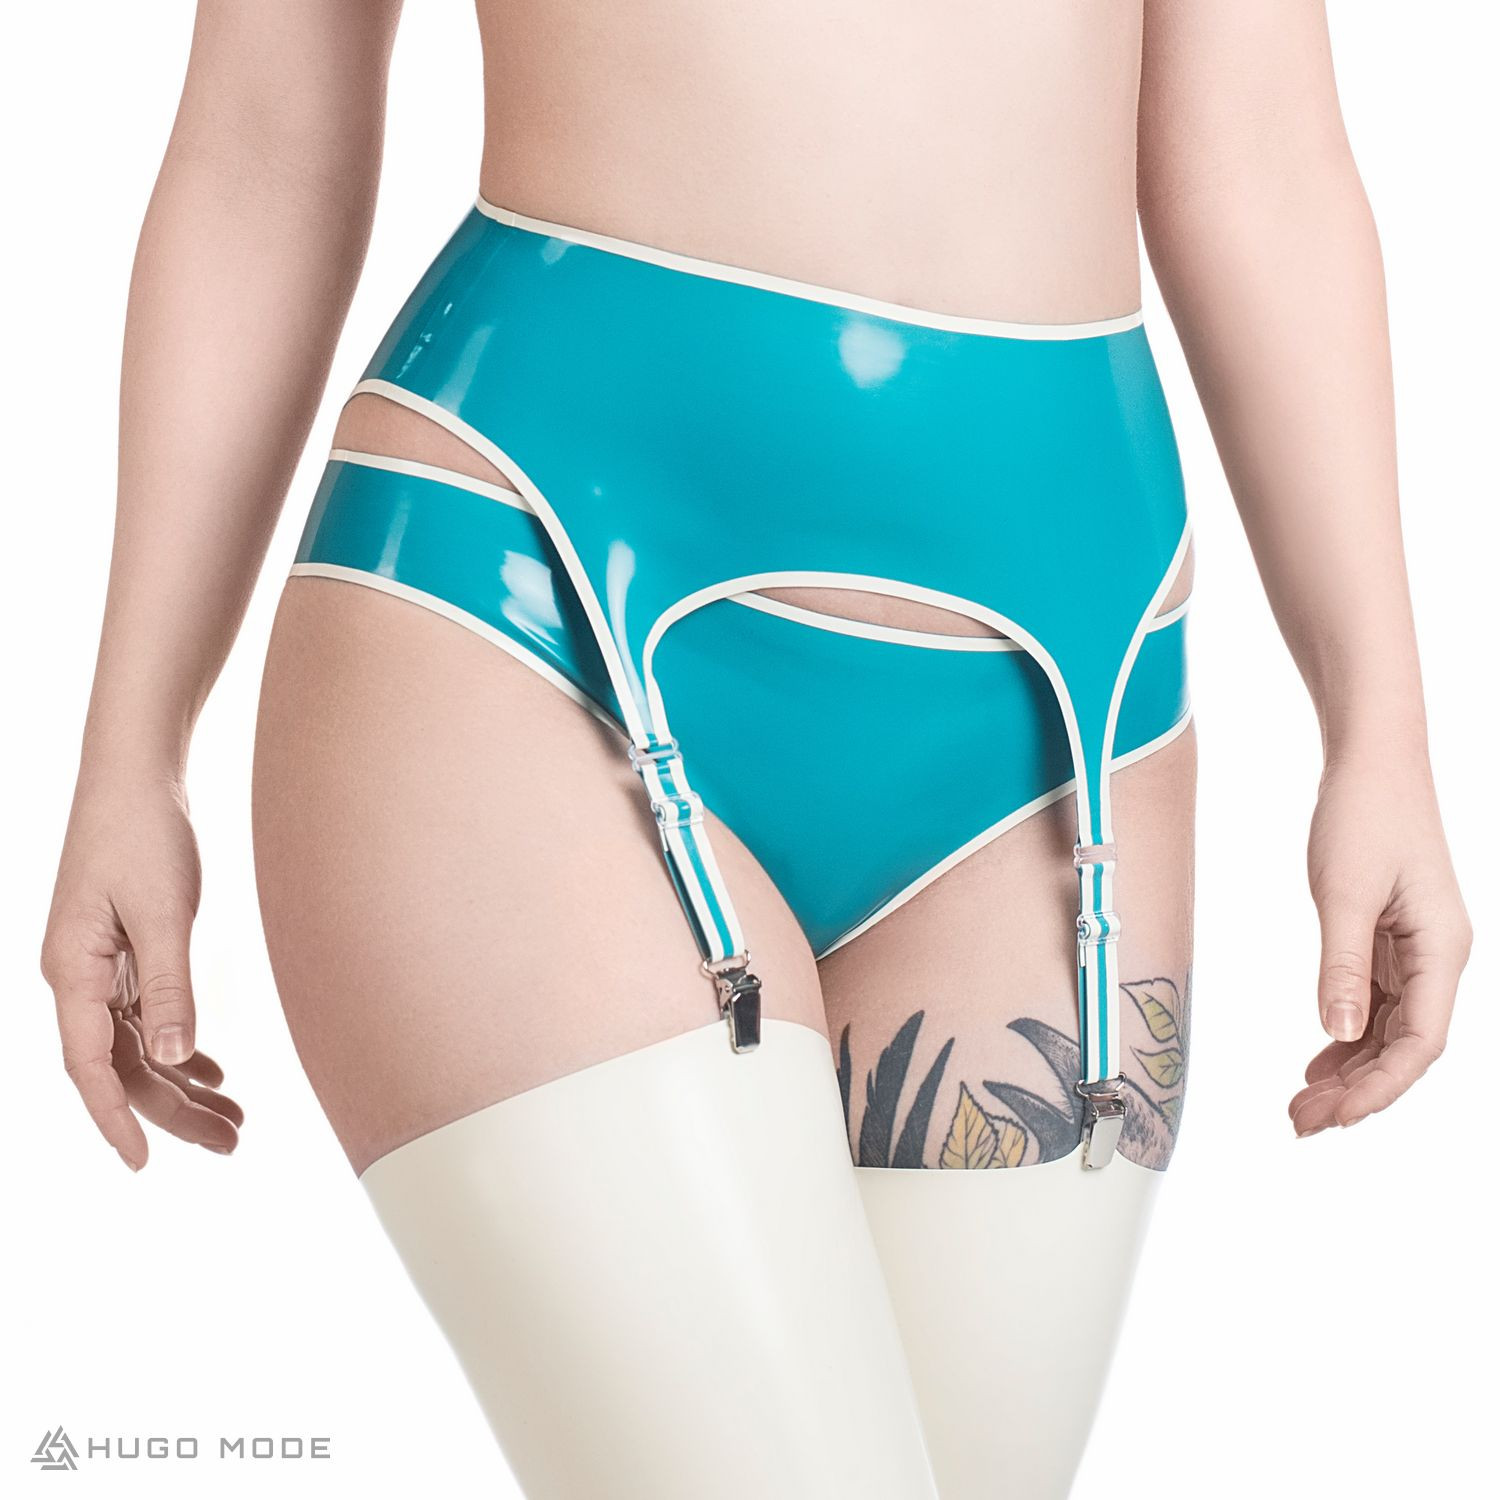 A latex garter belt in turquoise with a white contrast stripe.